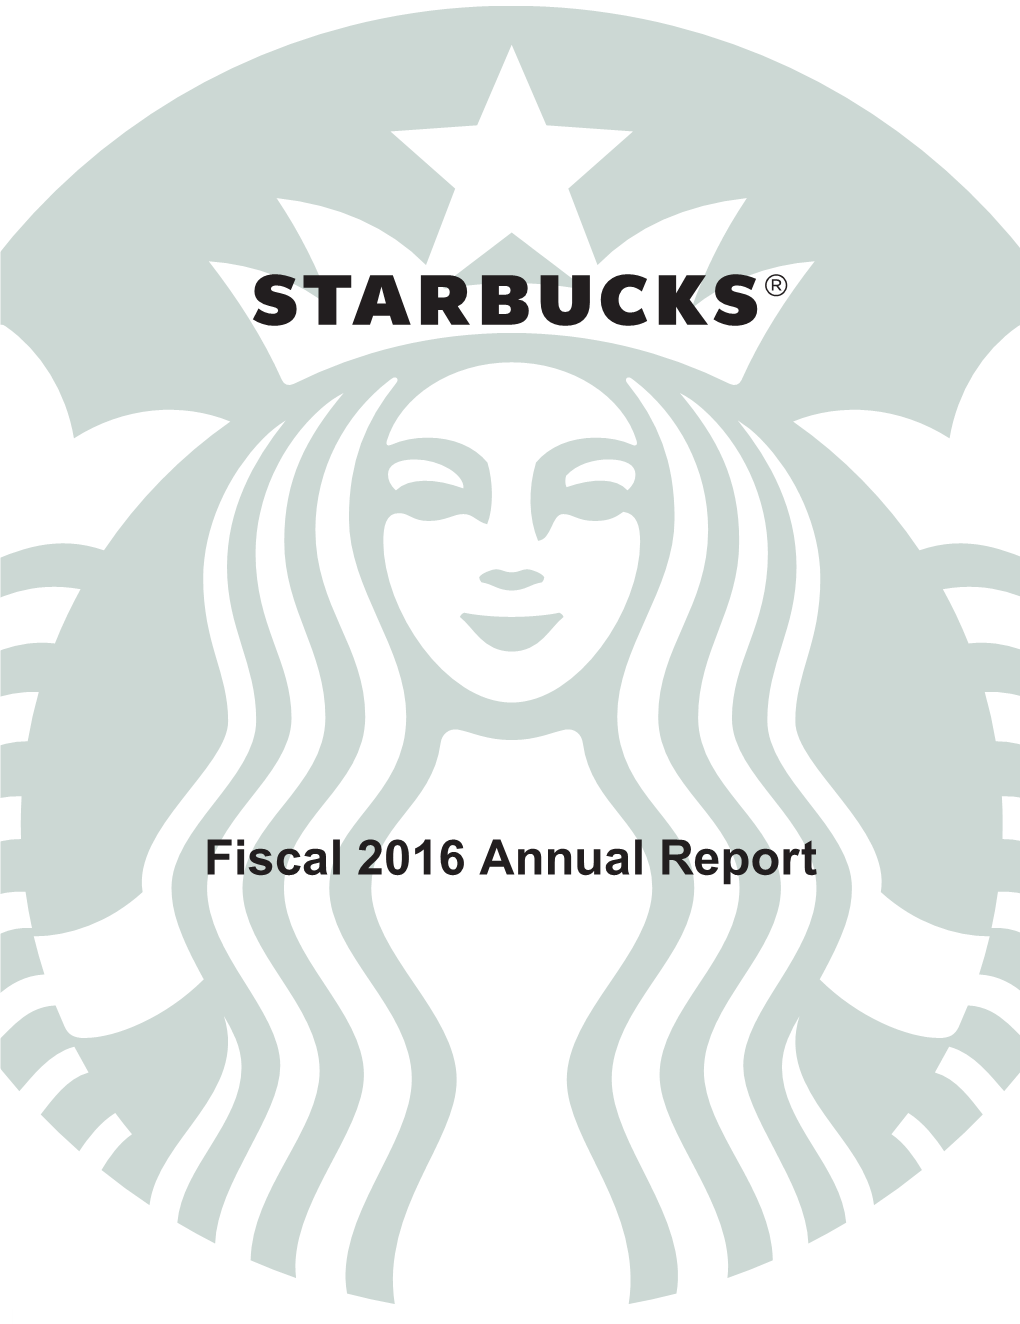 Fiscal 2016 Annual Report